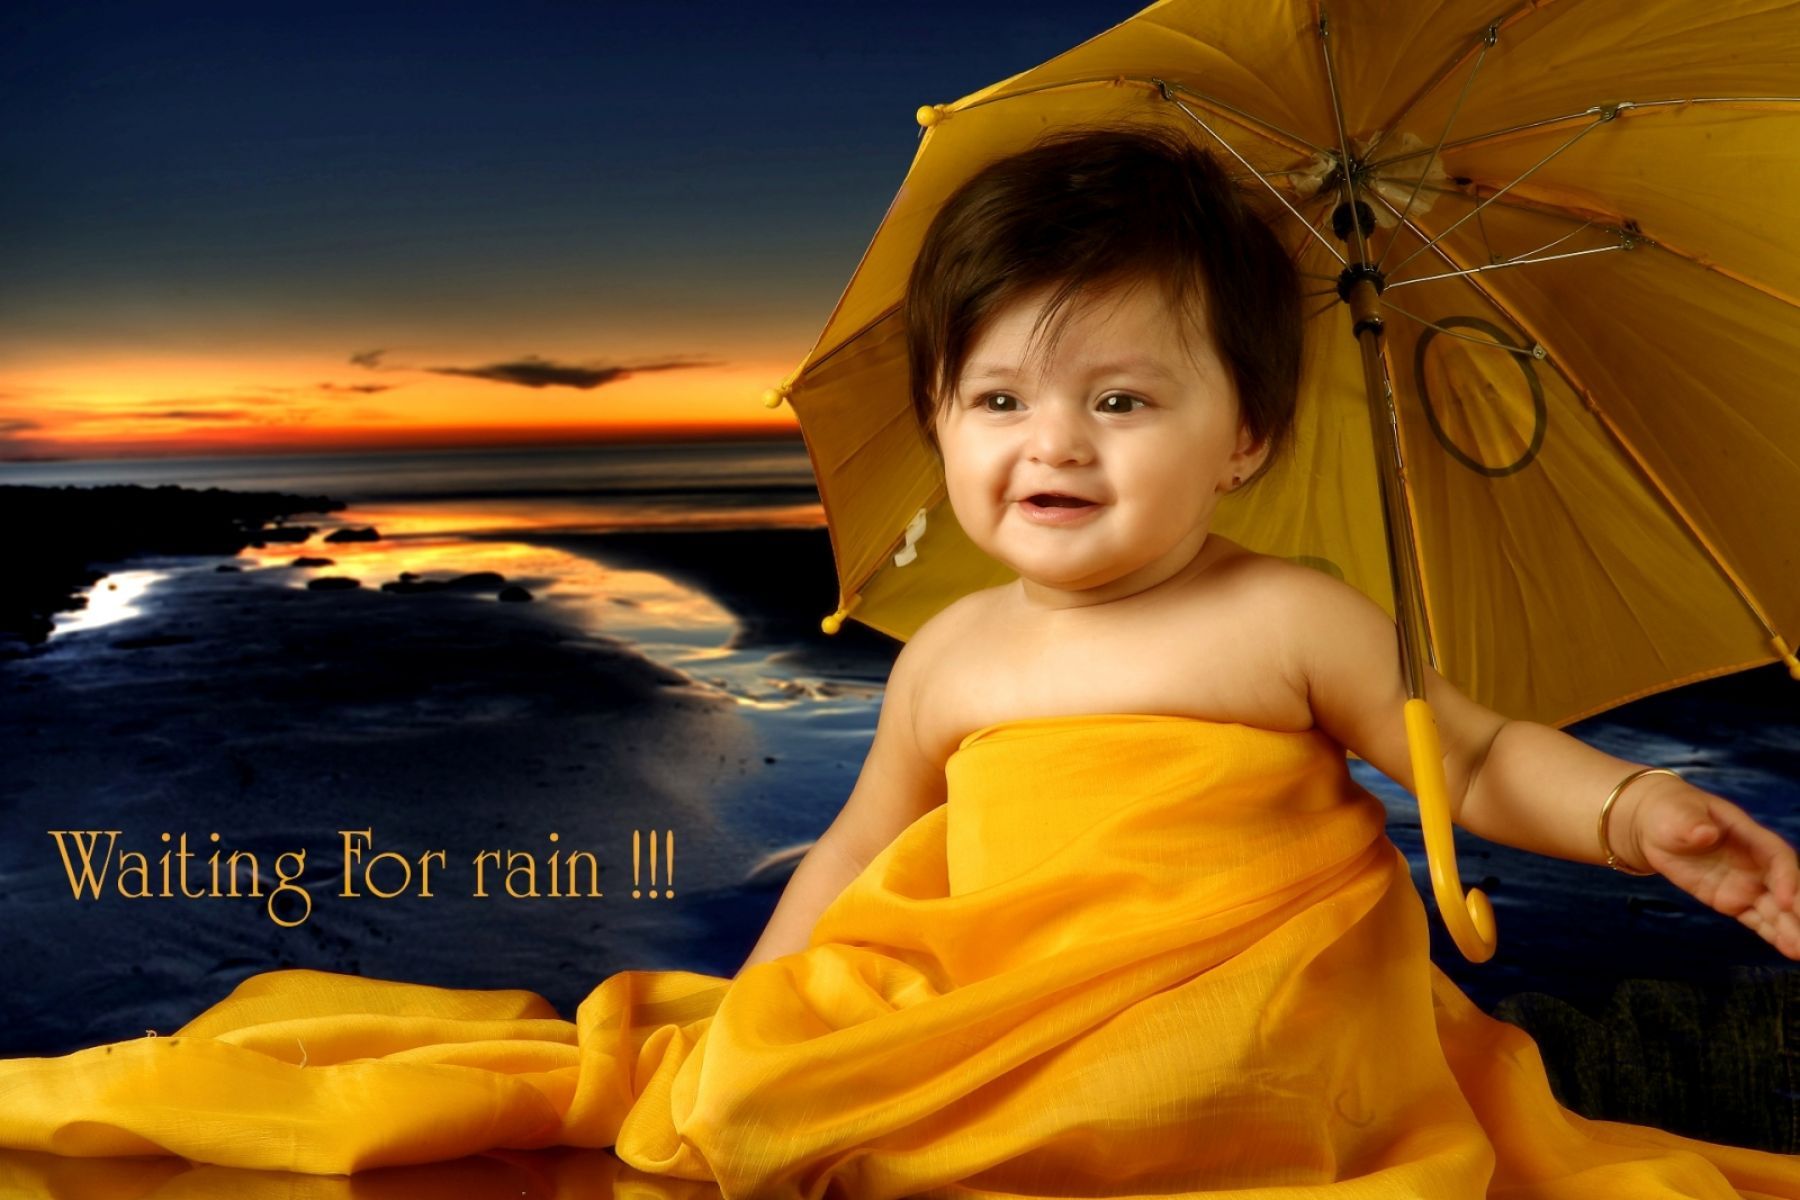 Beautiful Baby With Yellow Dress. HD Cute Wallpaper for Mobile and Desktop